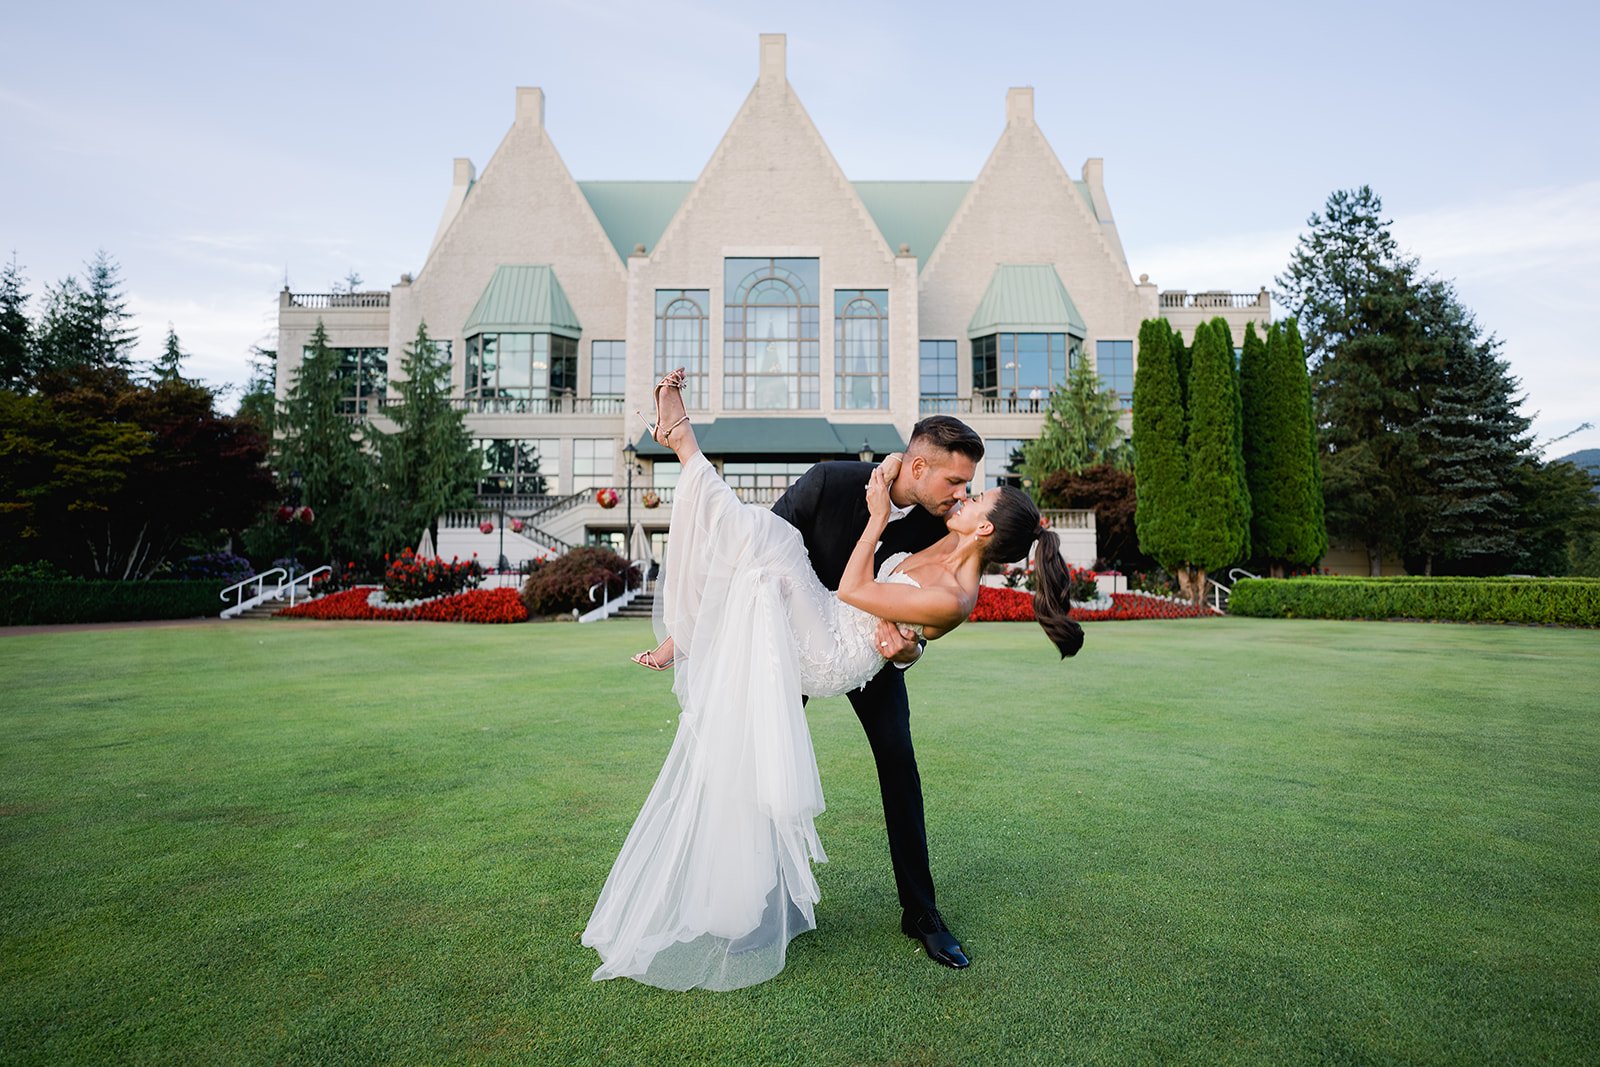 A goom dramatically dips his bride in an impressive dancemove on the lawn of Swaneset.  